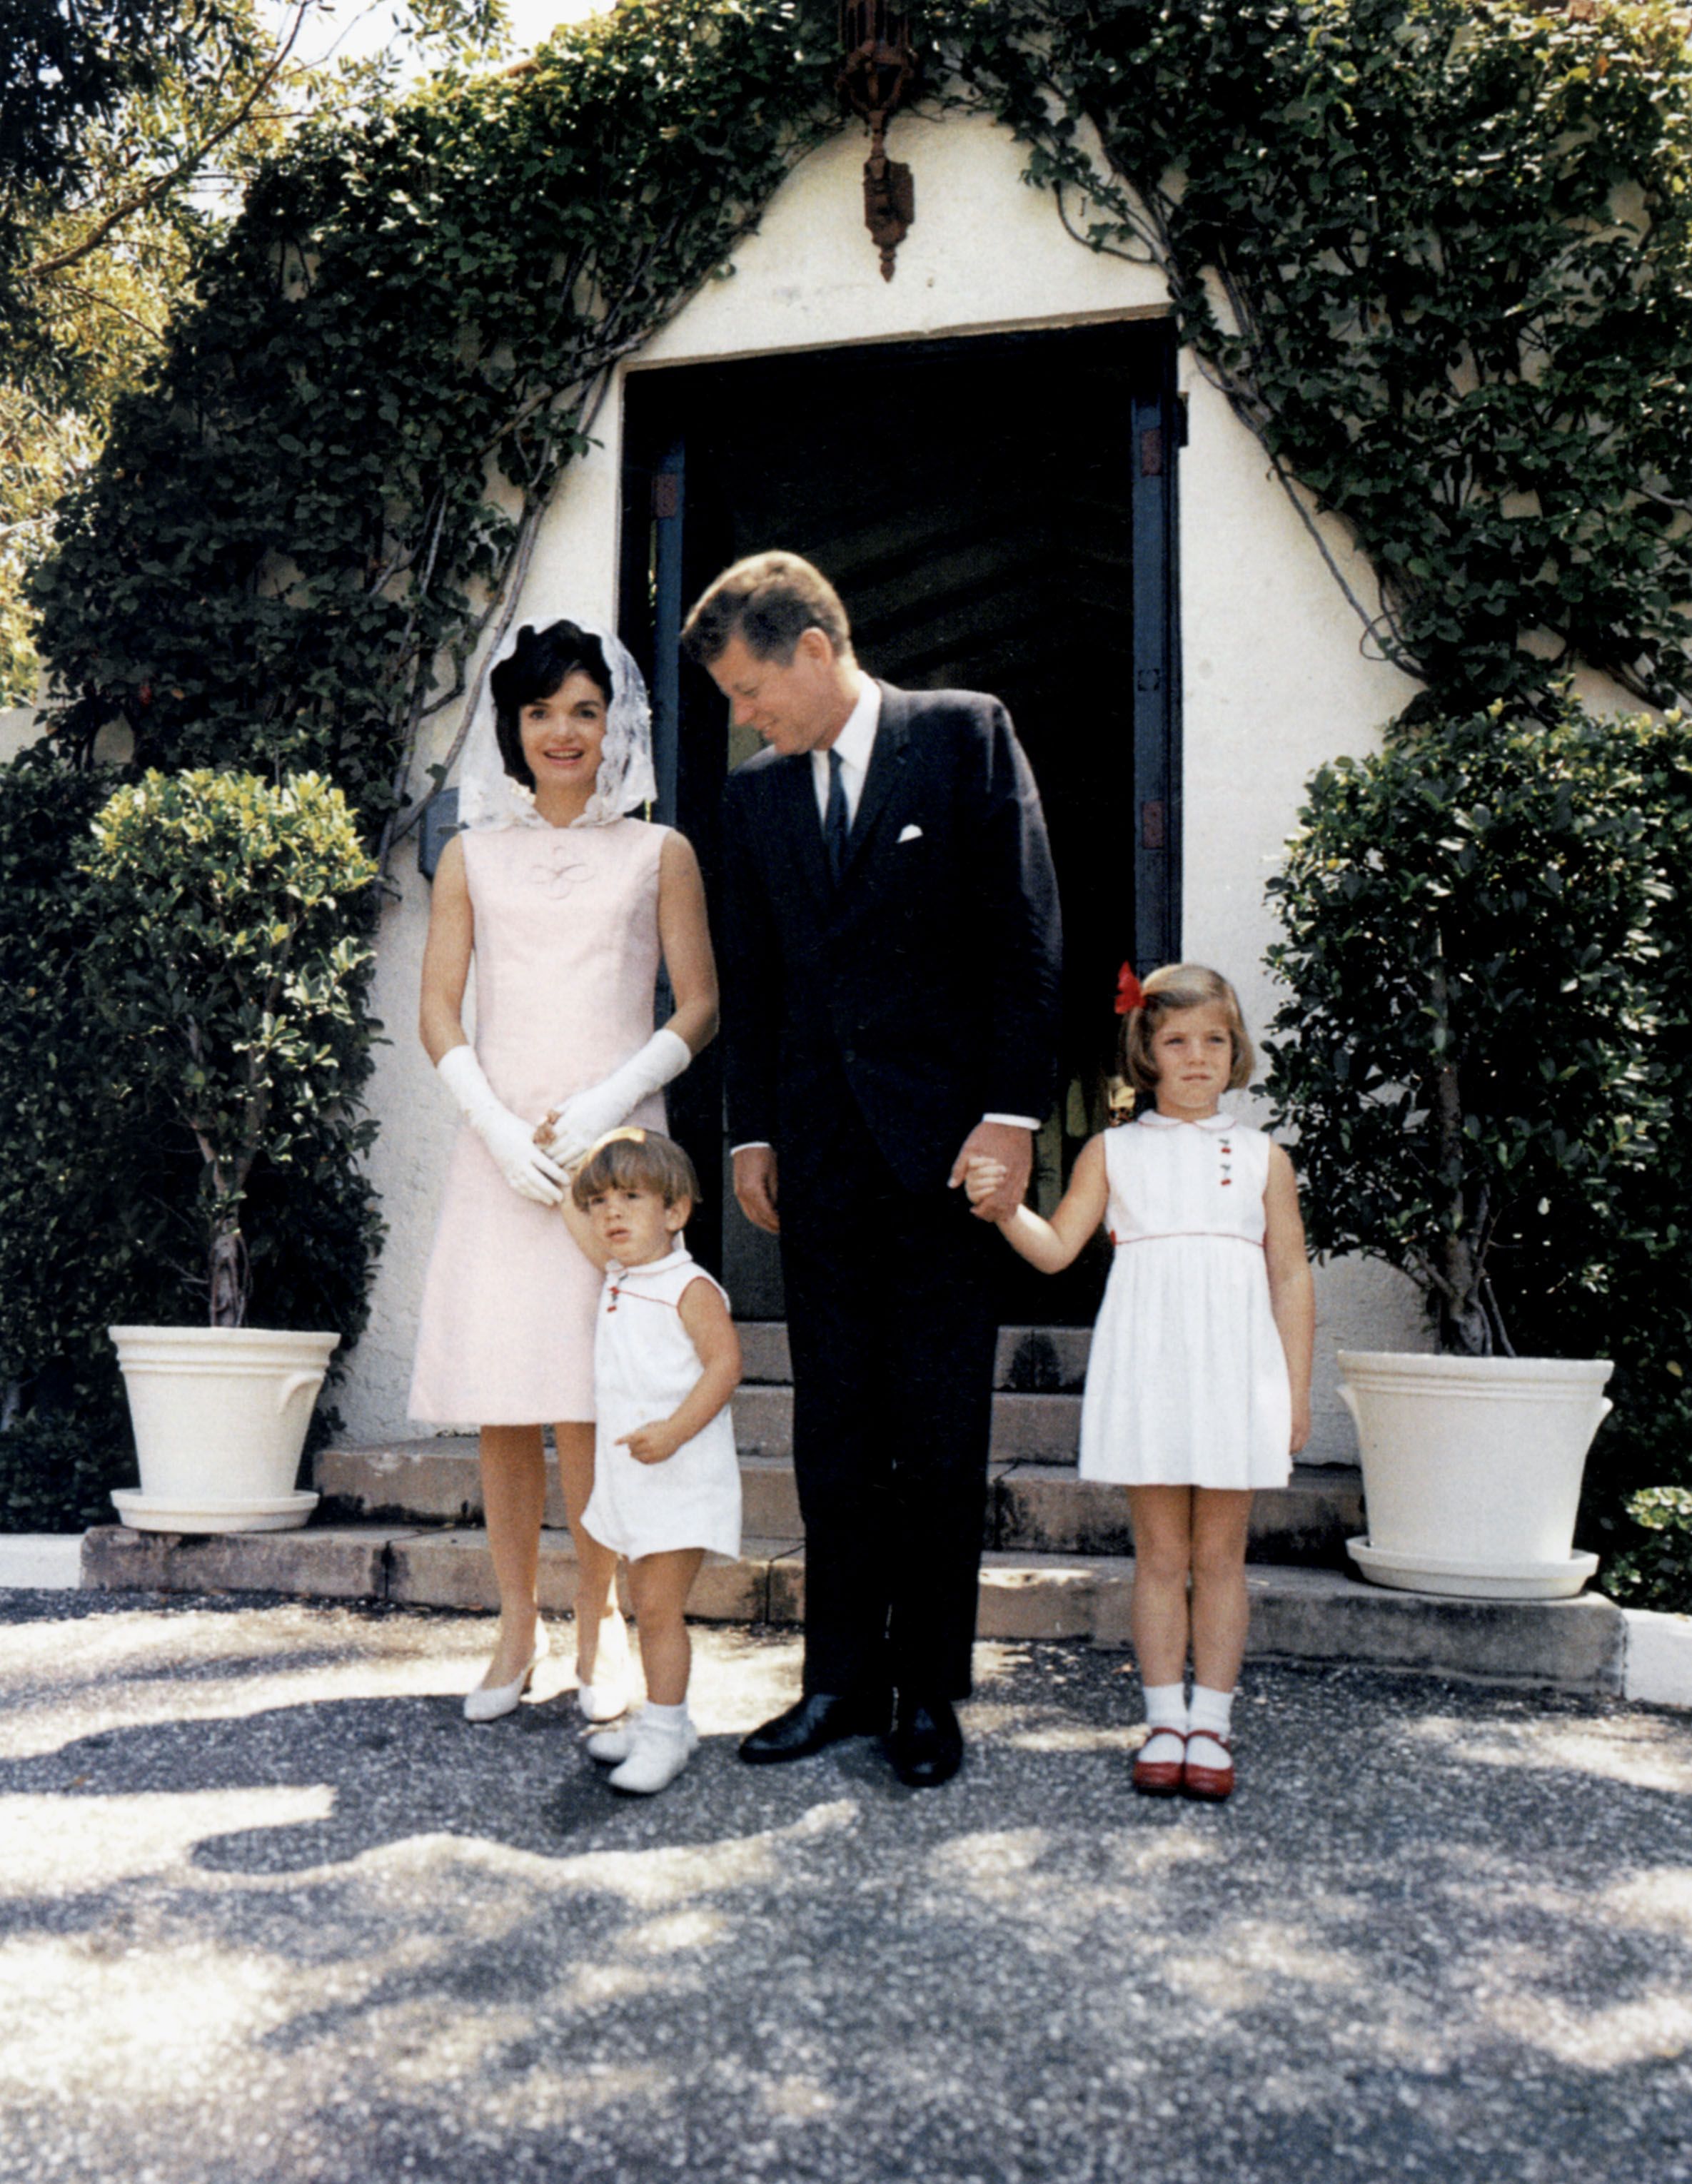 President John Kennedy, his wife Jackie, and their children John Jr. and Caroline at Palm Beach, Florida, on April 14, 1963. | Source: Apic/Getty Images